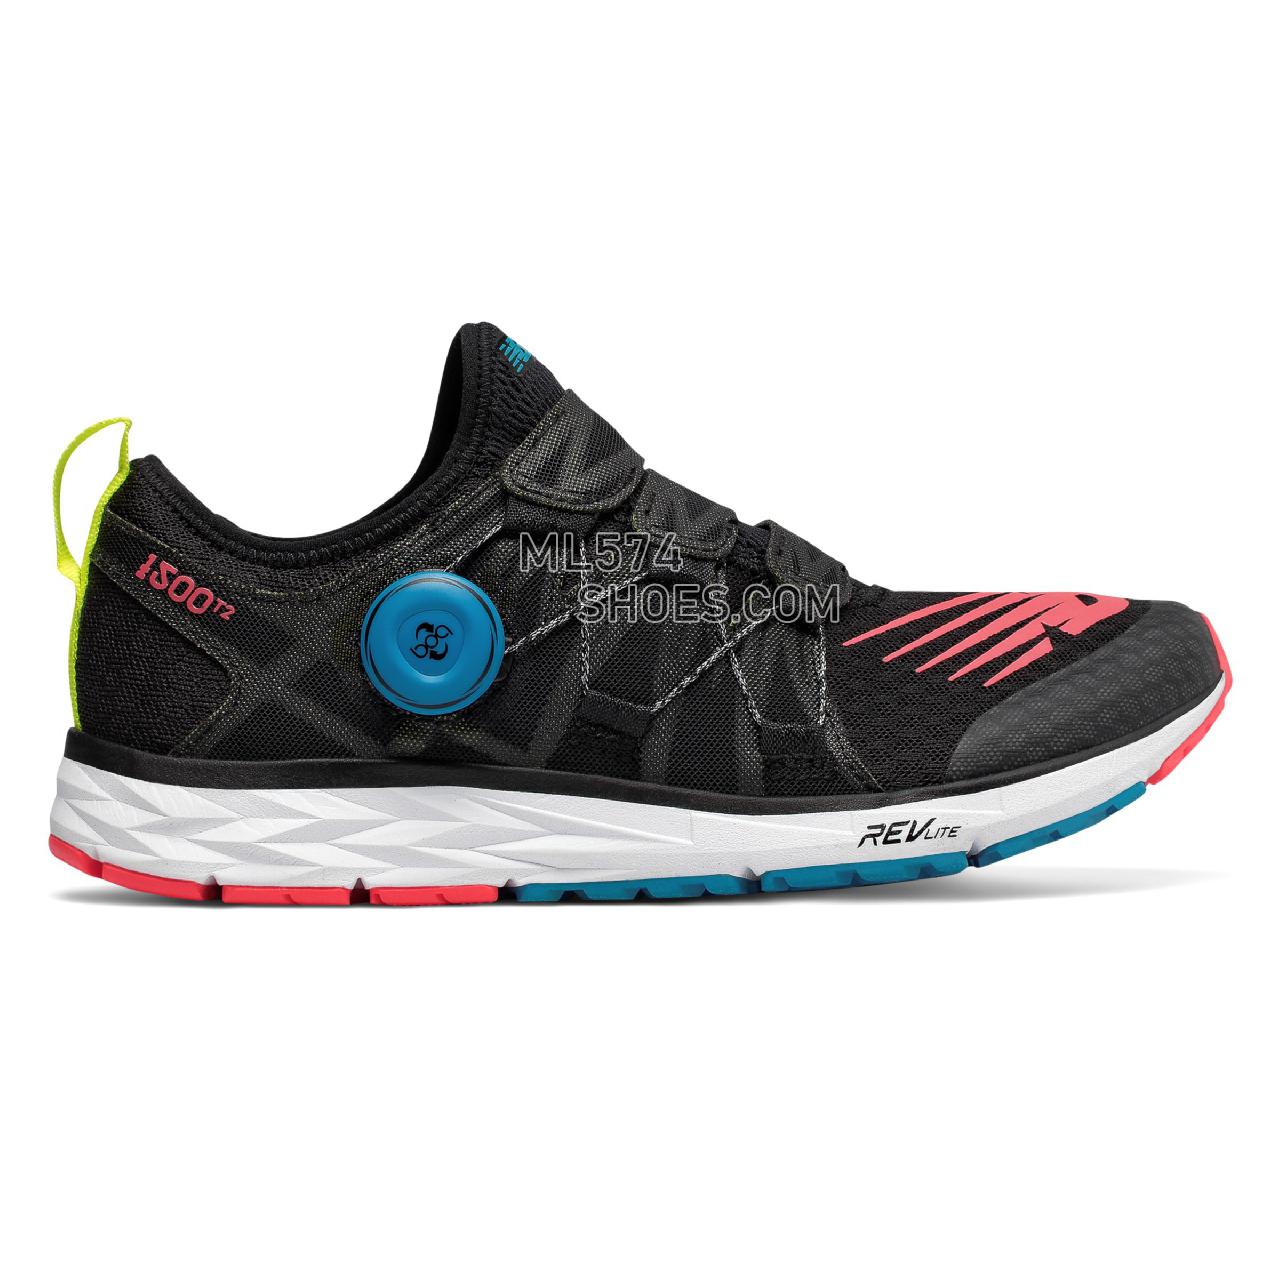 New Balance 1500T2 - Women's 1500 - Running Black with Hi-Lite and Vivid Coral - W1500BB4